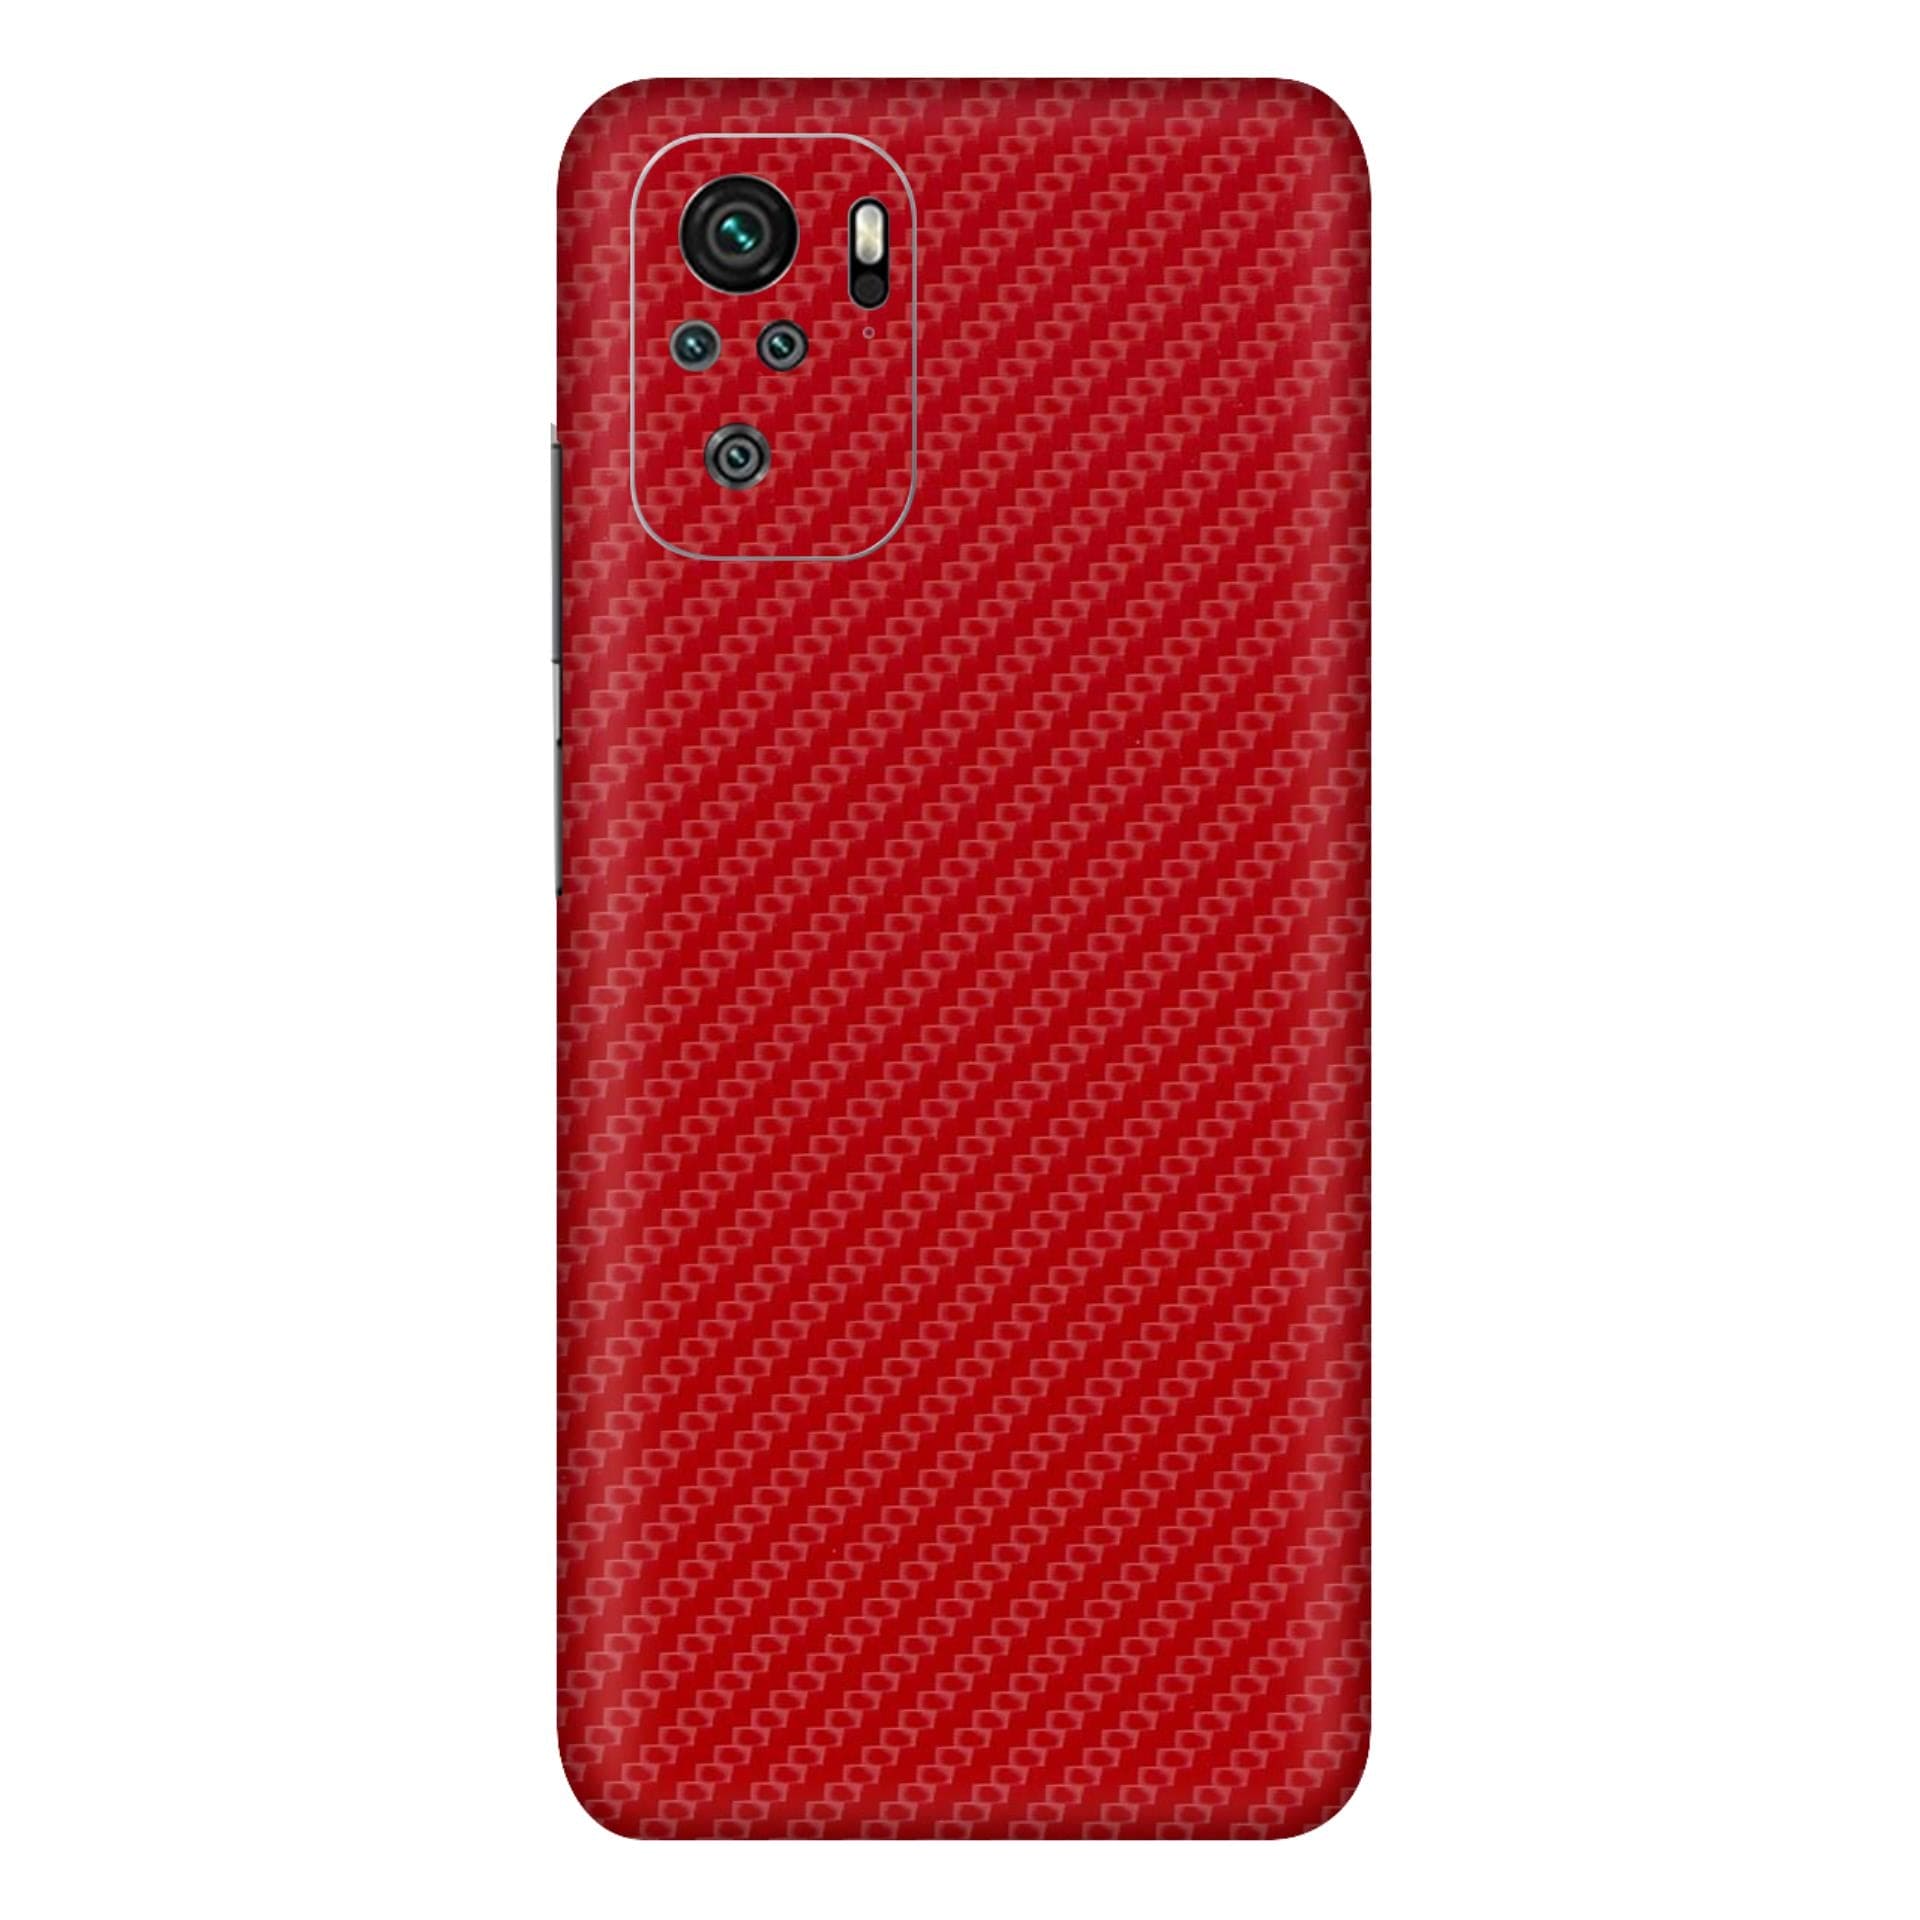 Redmi Note 10 Carbon Red skins